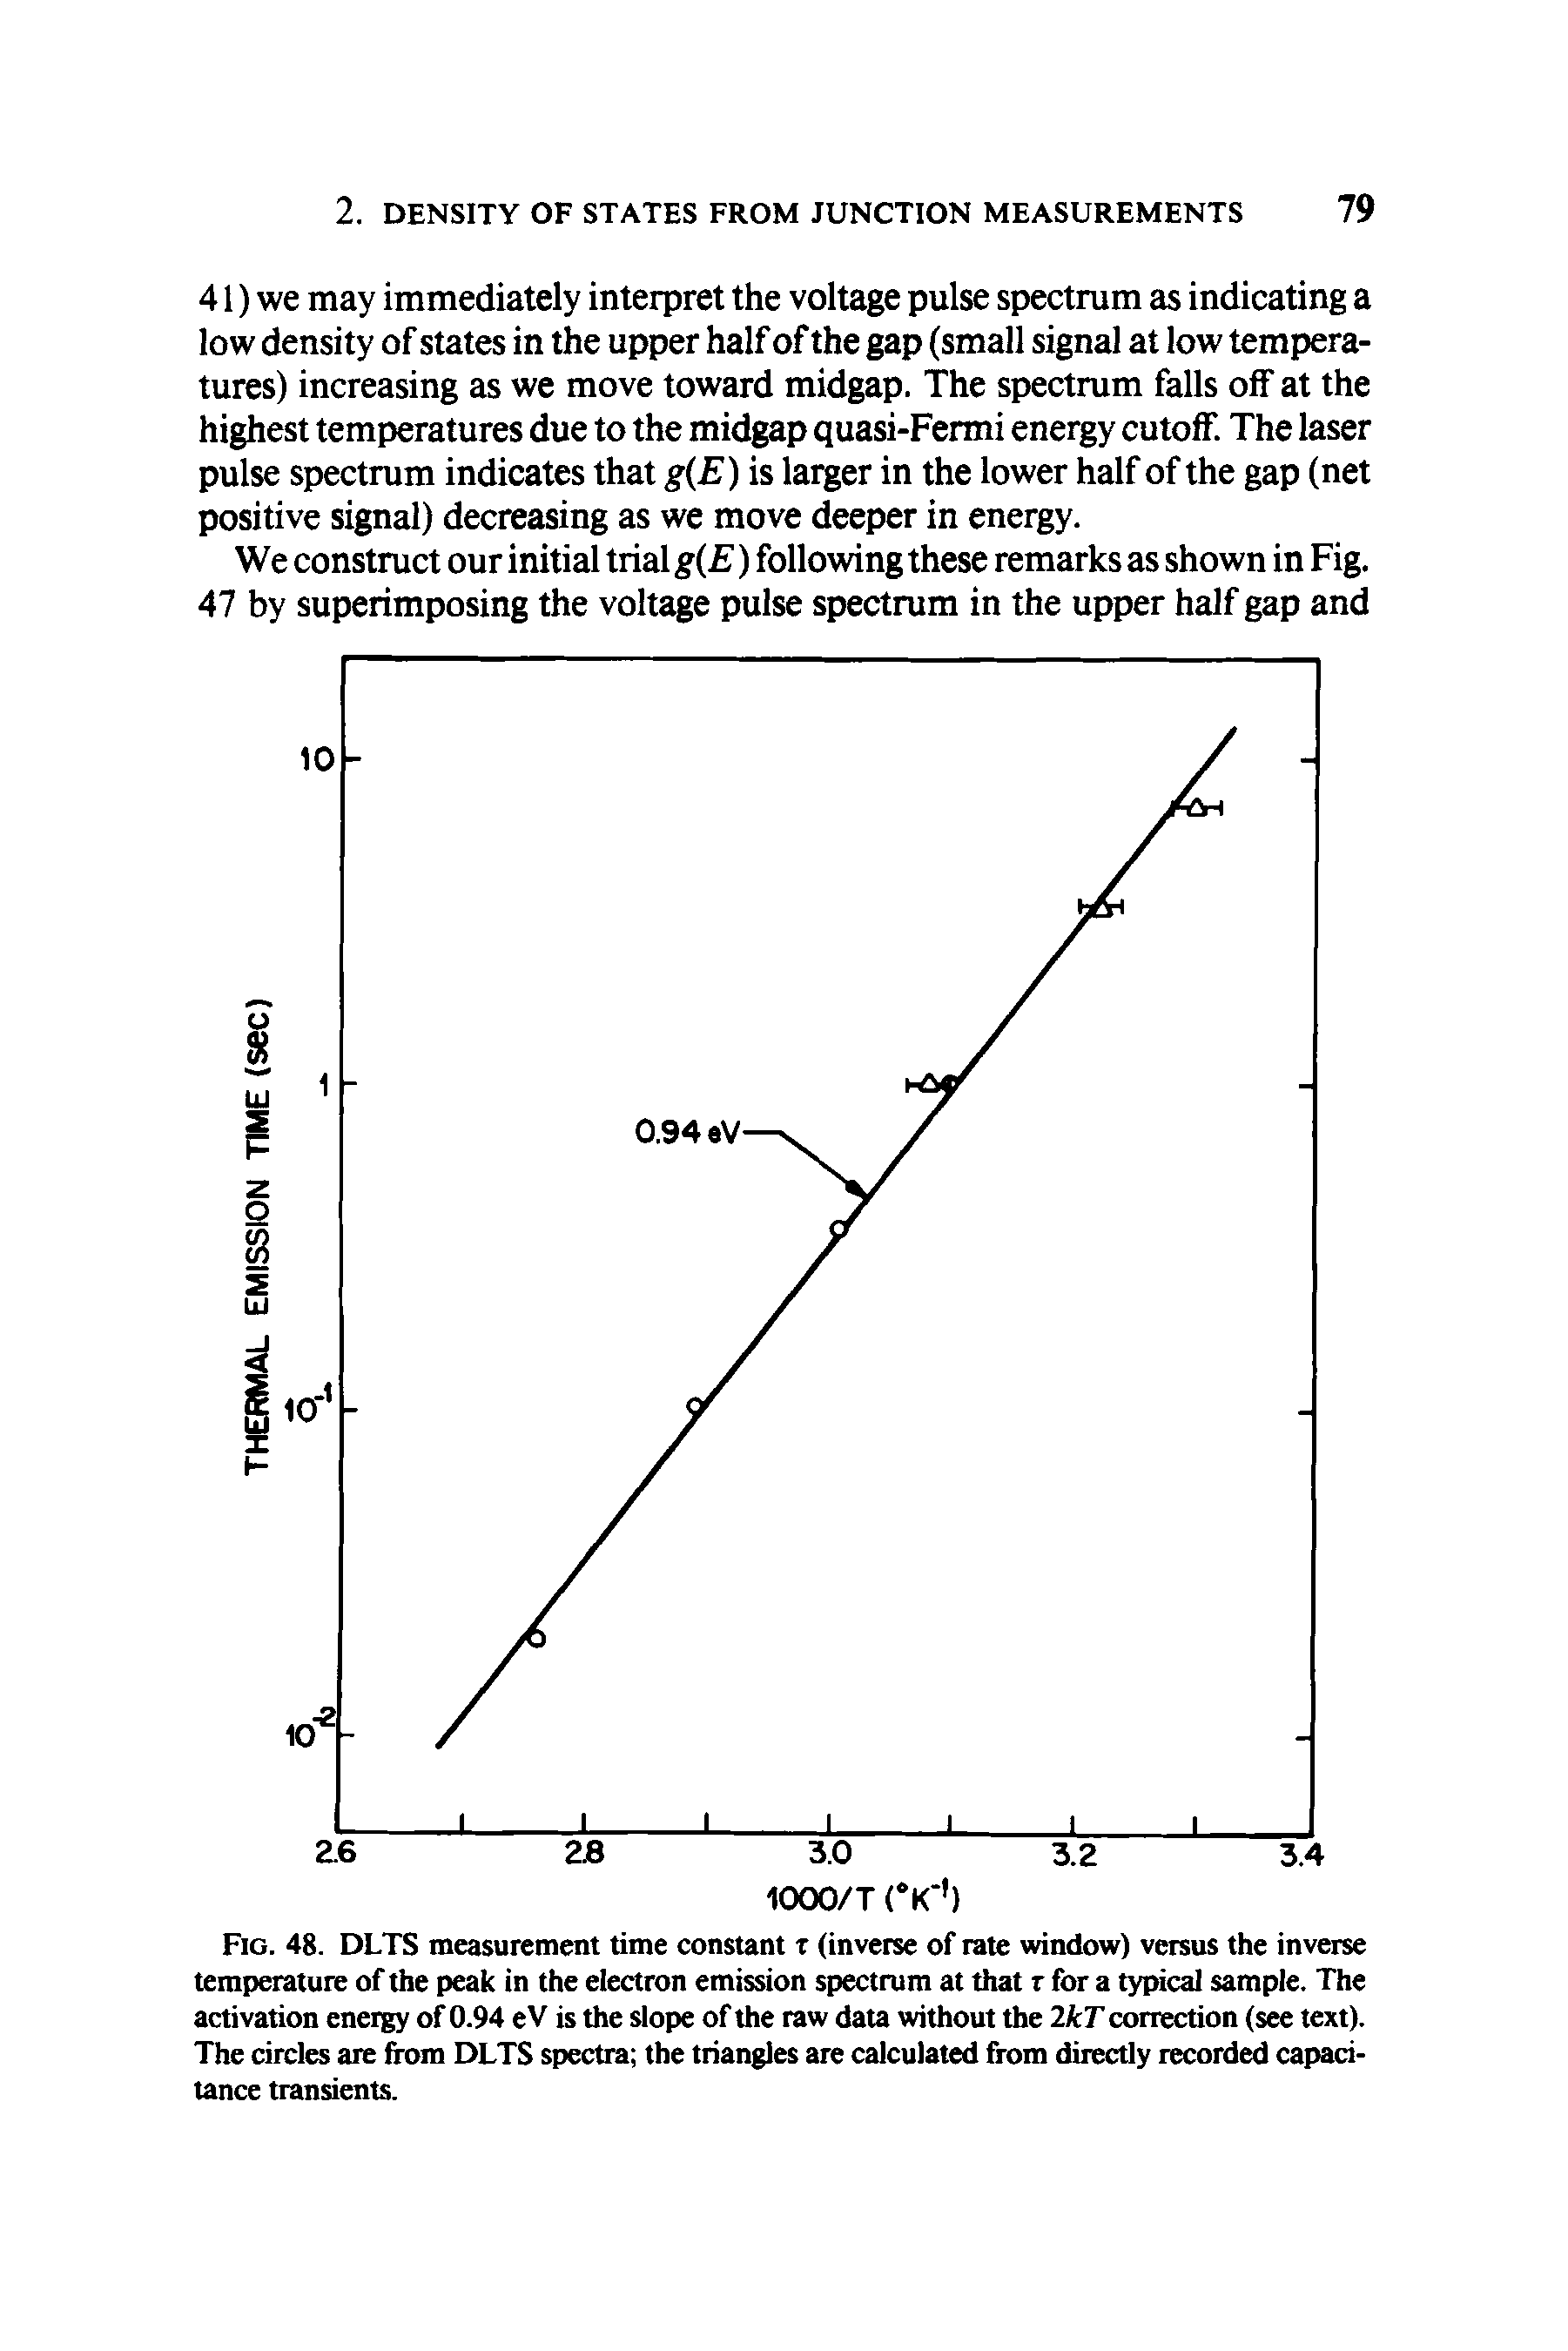 Fig. 48. DLTS measurement time constant t (inverse of rate window) versus the inverse temperature of the peak in the electron emission spectrum at that r for a typical sample. The activation energy of 0.94 eV is the slope of the raw data without the 2kT correction (see text). The circles are from DLTS spectra the triangles are calculated from directly recorded capacitance transients.